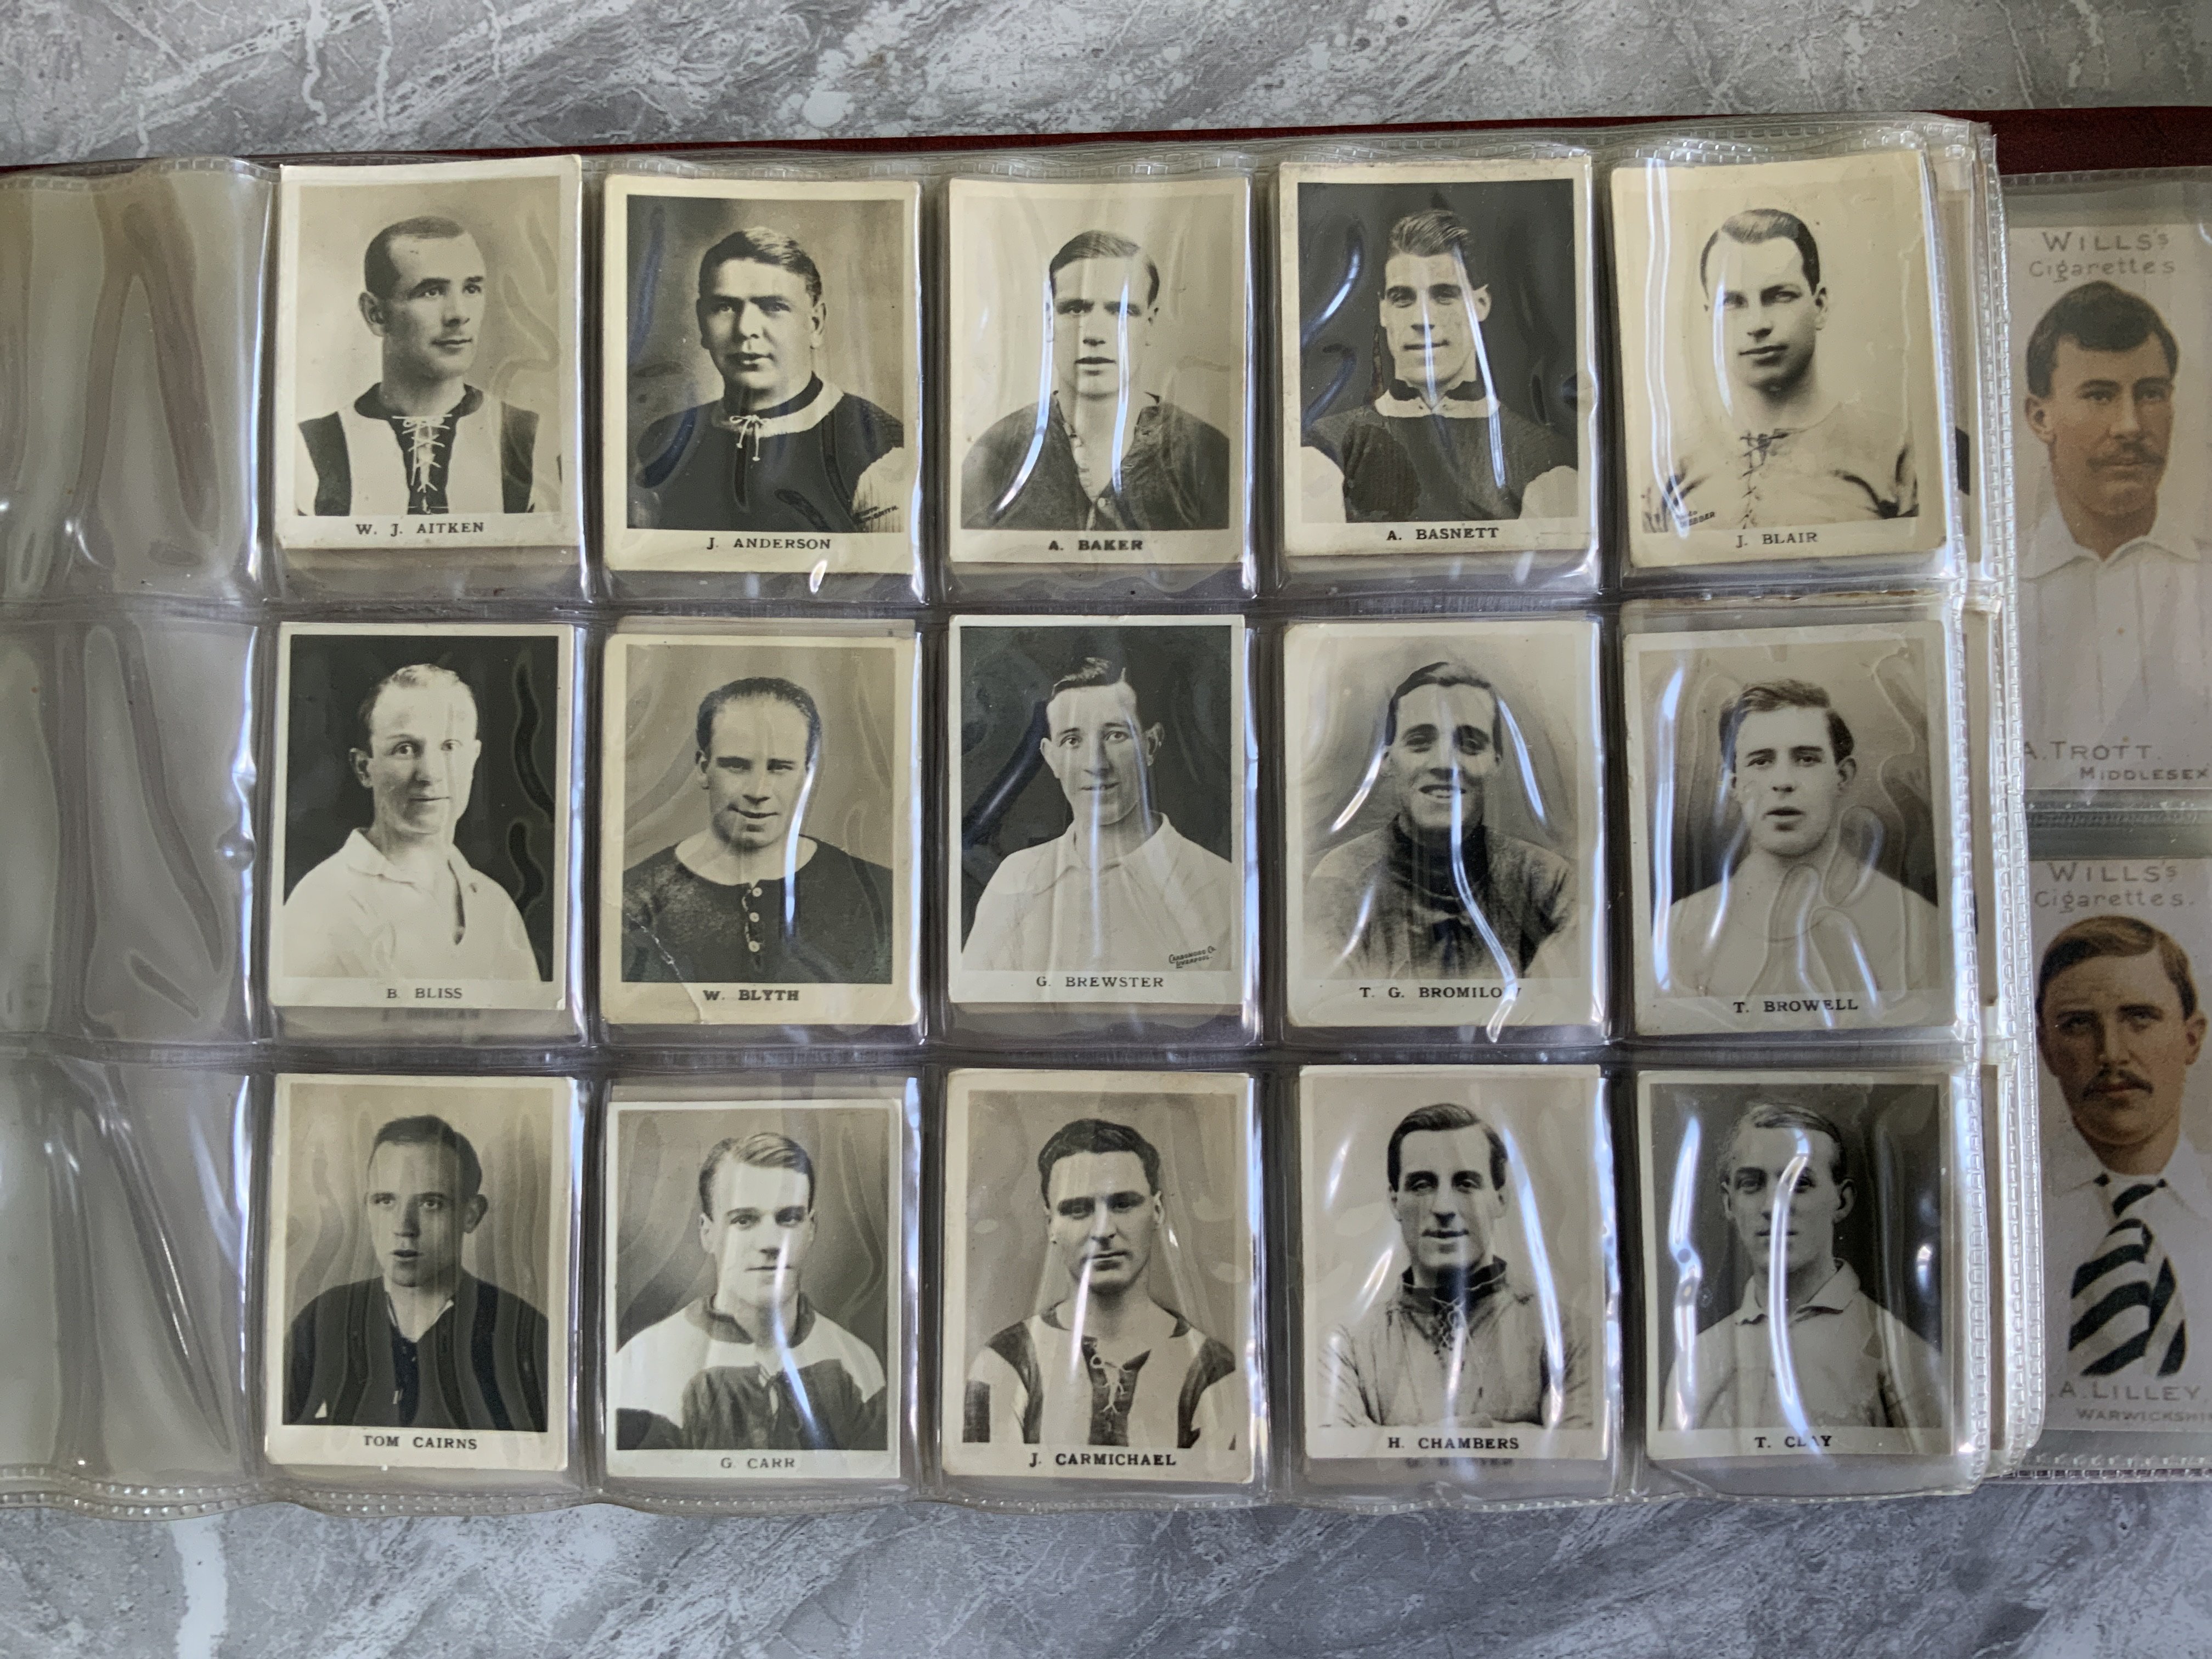 Pinnace Football Card Collection: 87 Pinnace cards with the book listing and photographing each